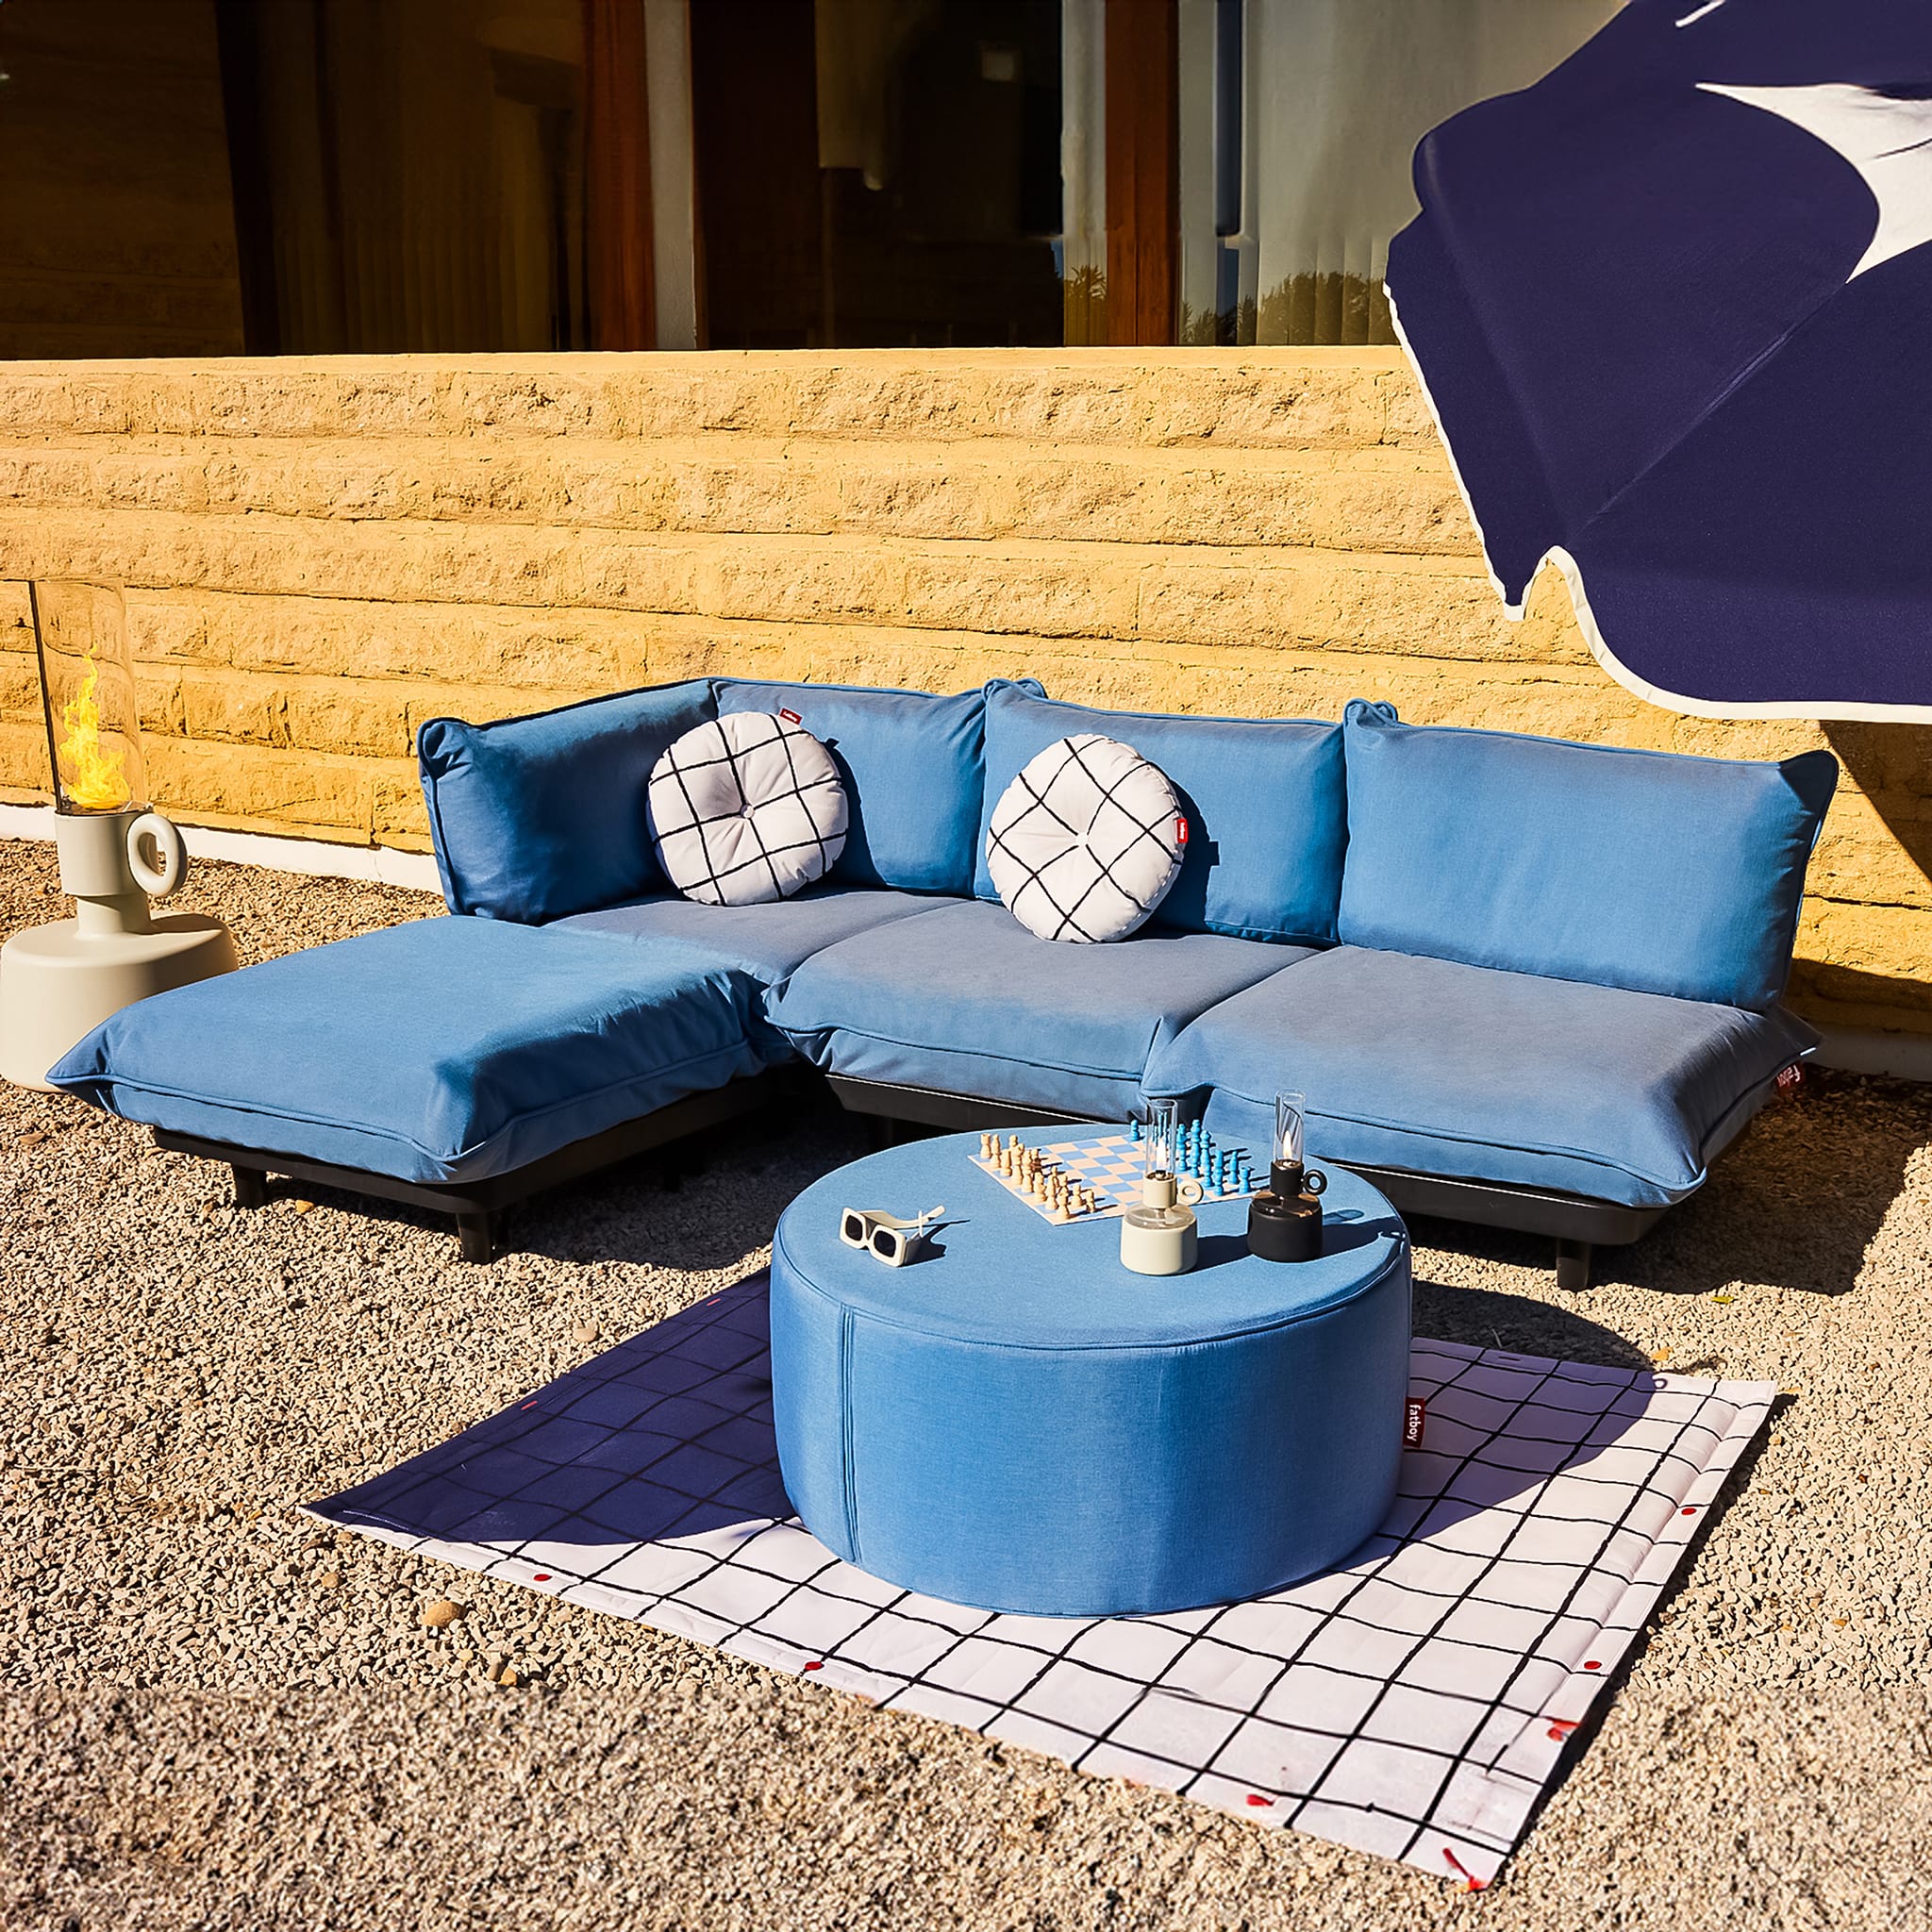 Choose the Paletti 4-Seater for your outdoor space, offering ample, adaptable seating with a water-resistant, easy-to-clean surface.